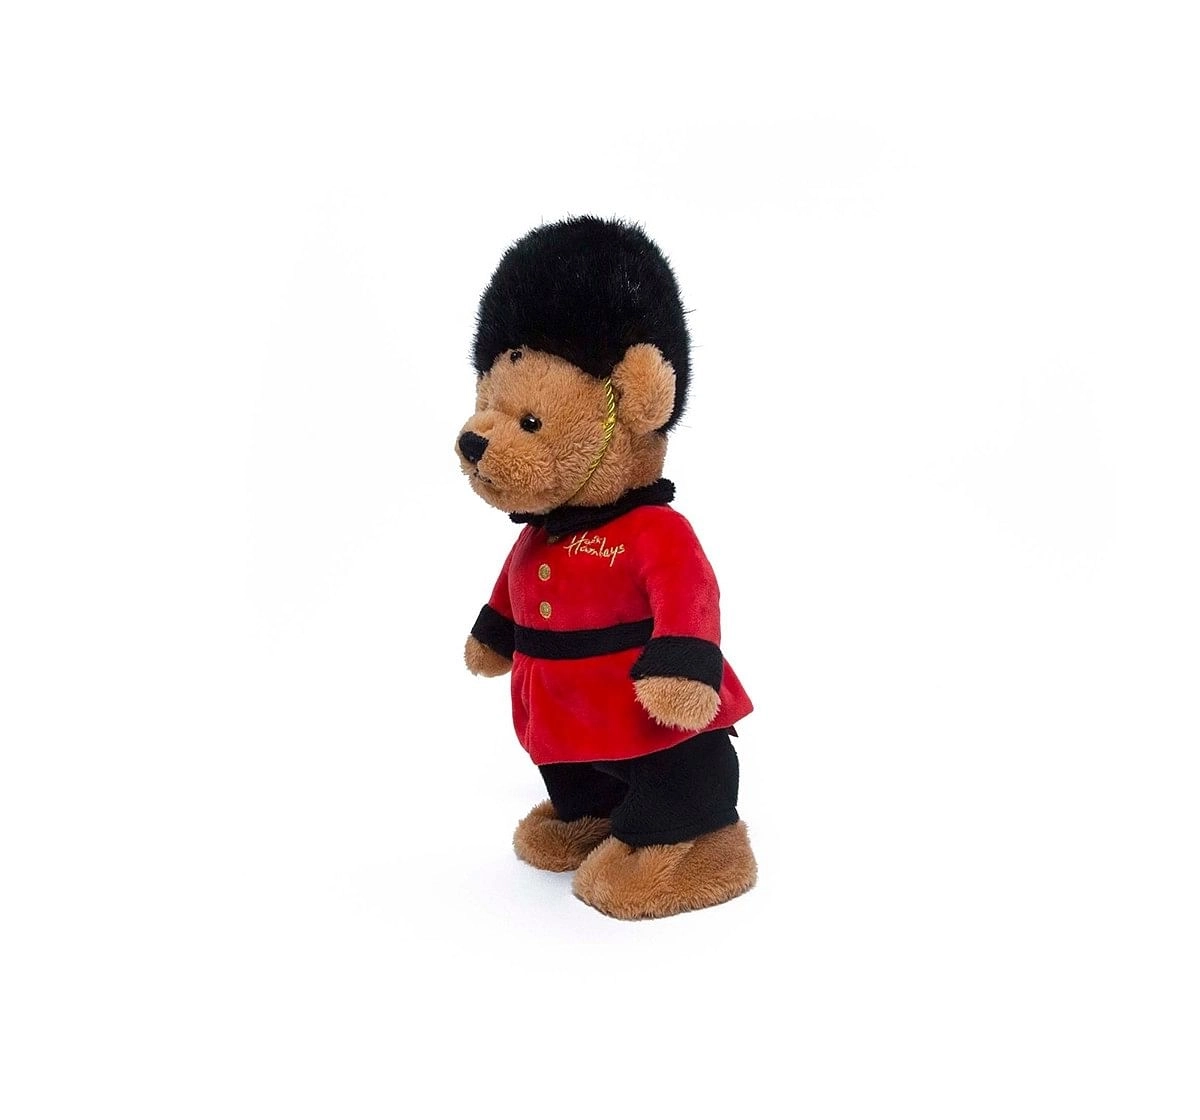 Hamleys Movers And Shakers Marching Bear, Red Interactive Soft Toys for Kids age 3Y+ - 18 Cm (Red)